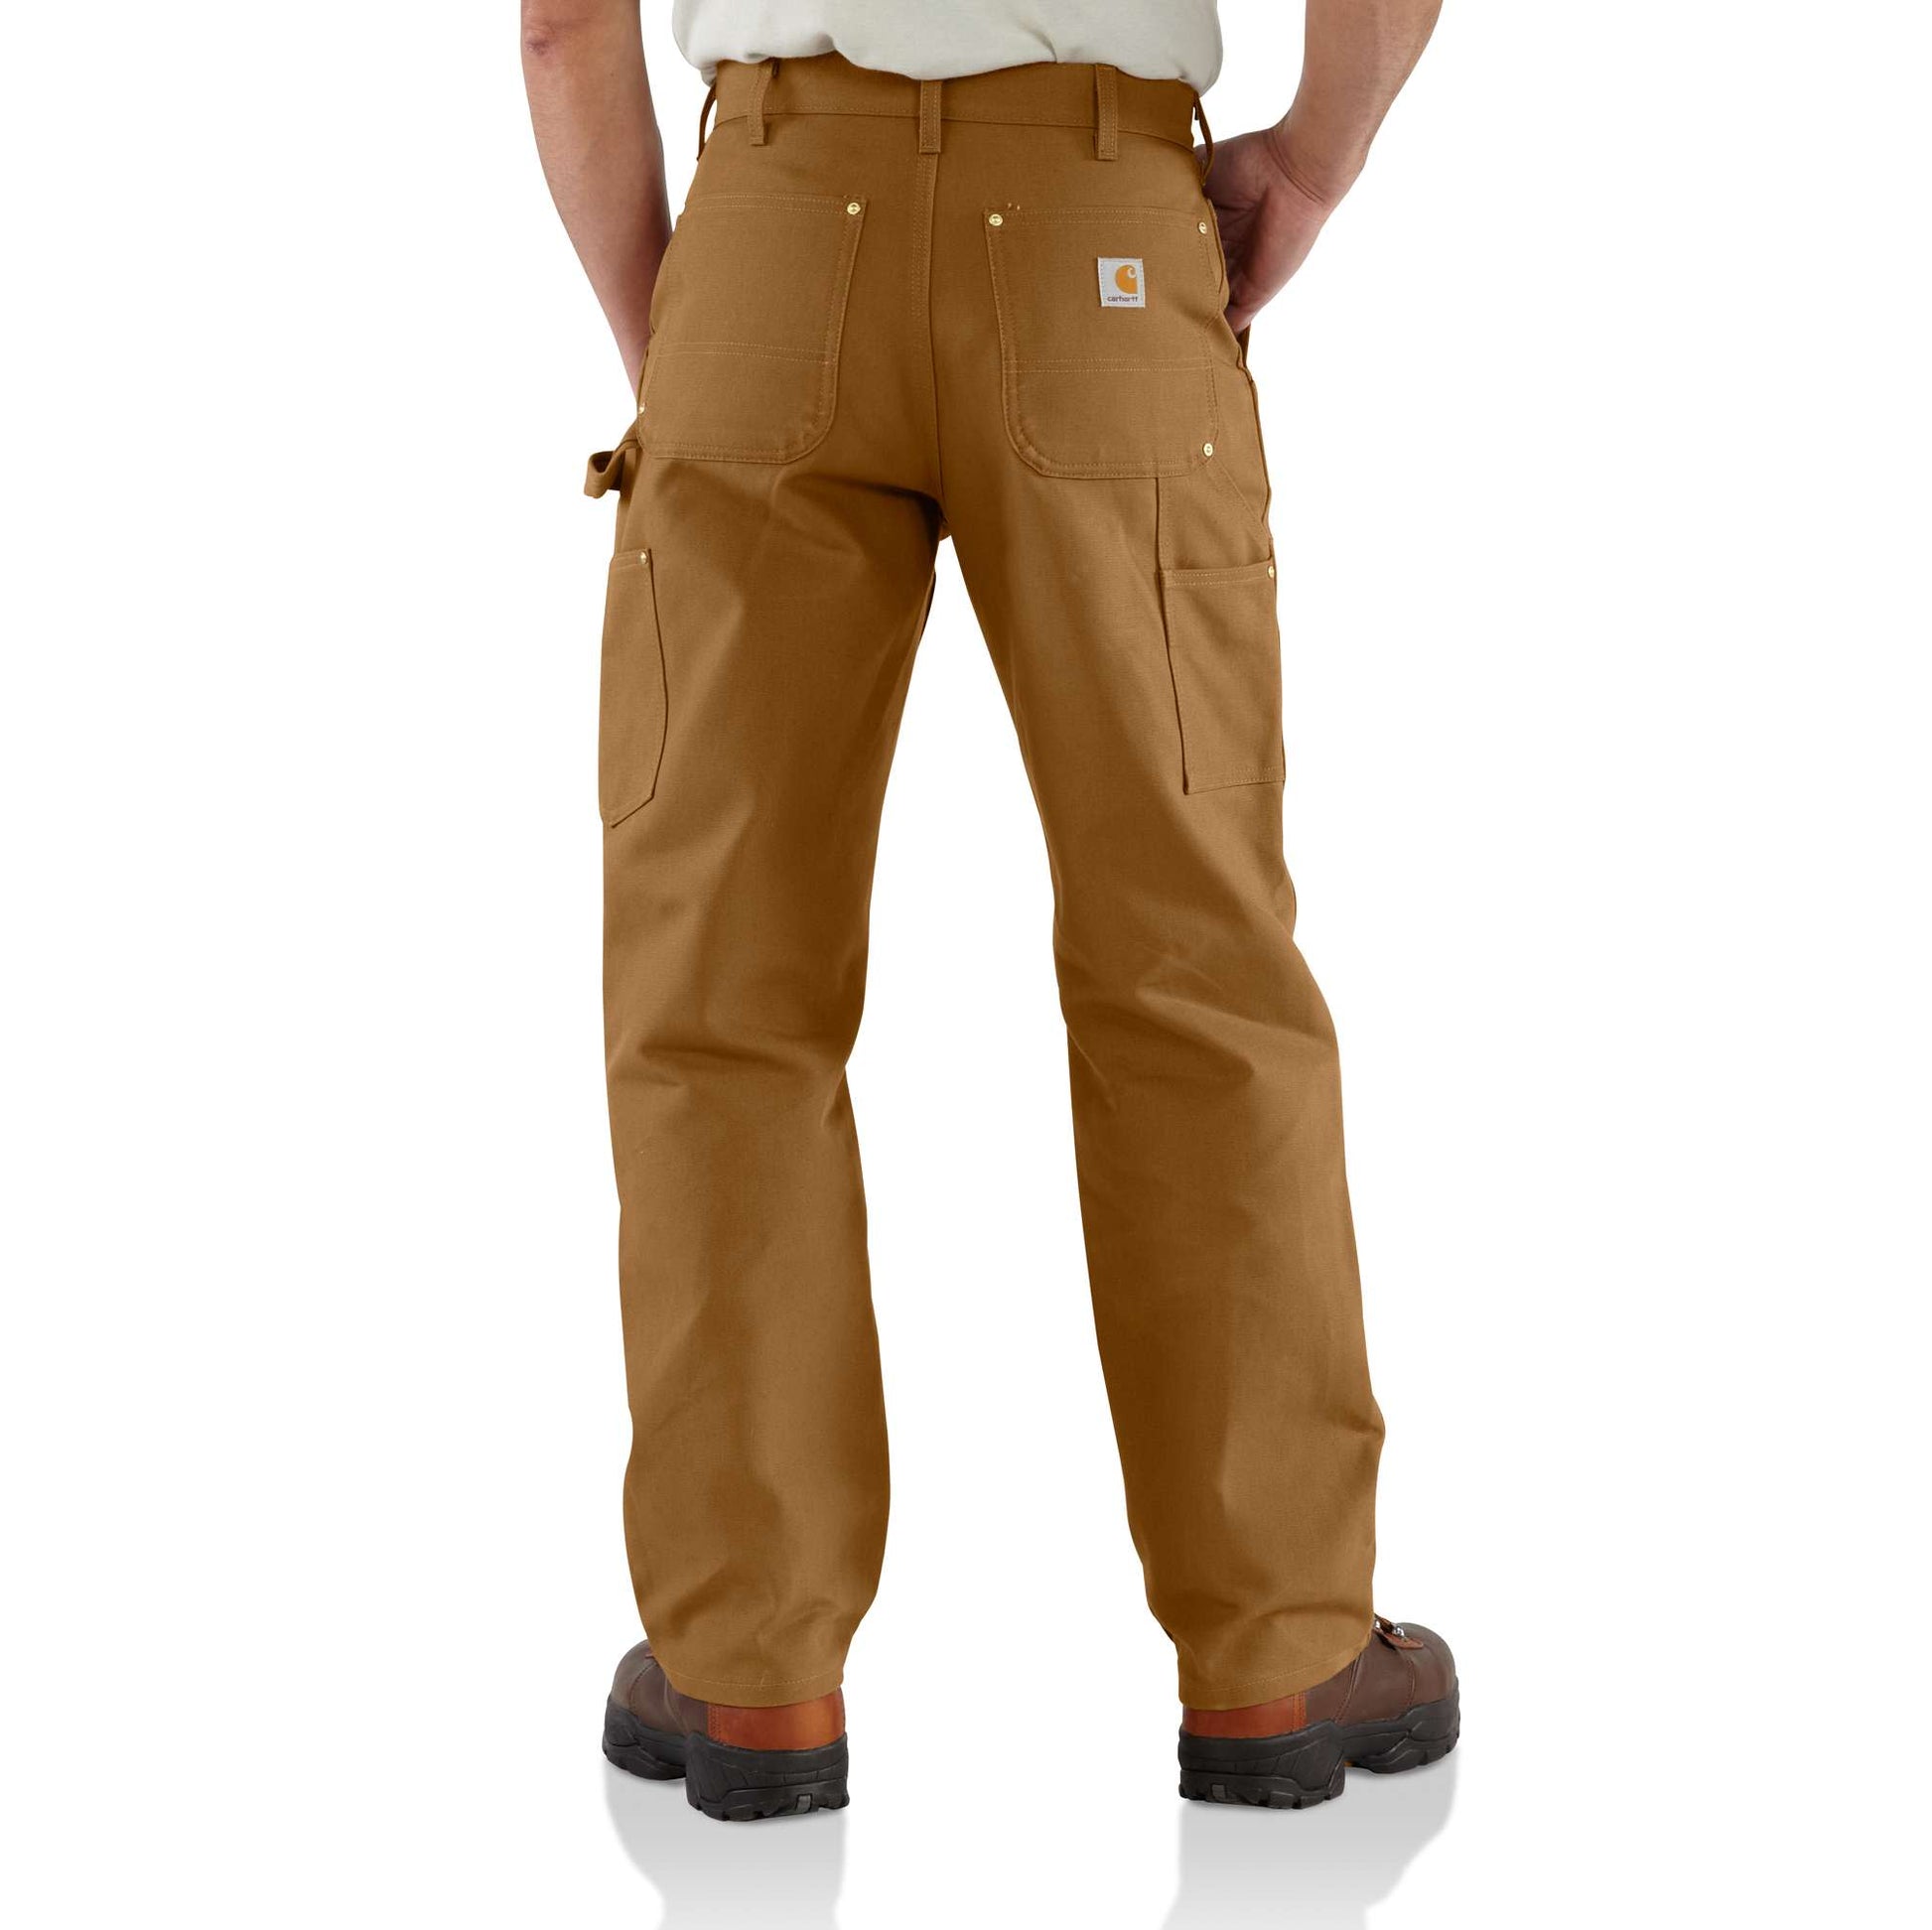 Carhartt Men's Washed Duck Double Front Work Dungaree Pant - 31x34